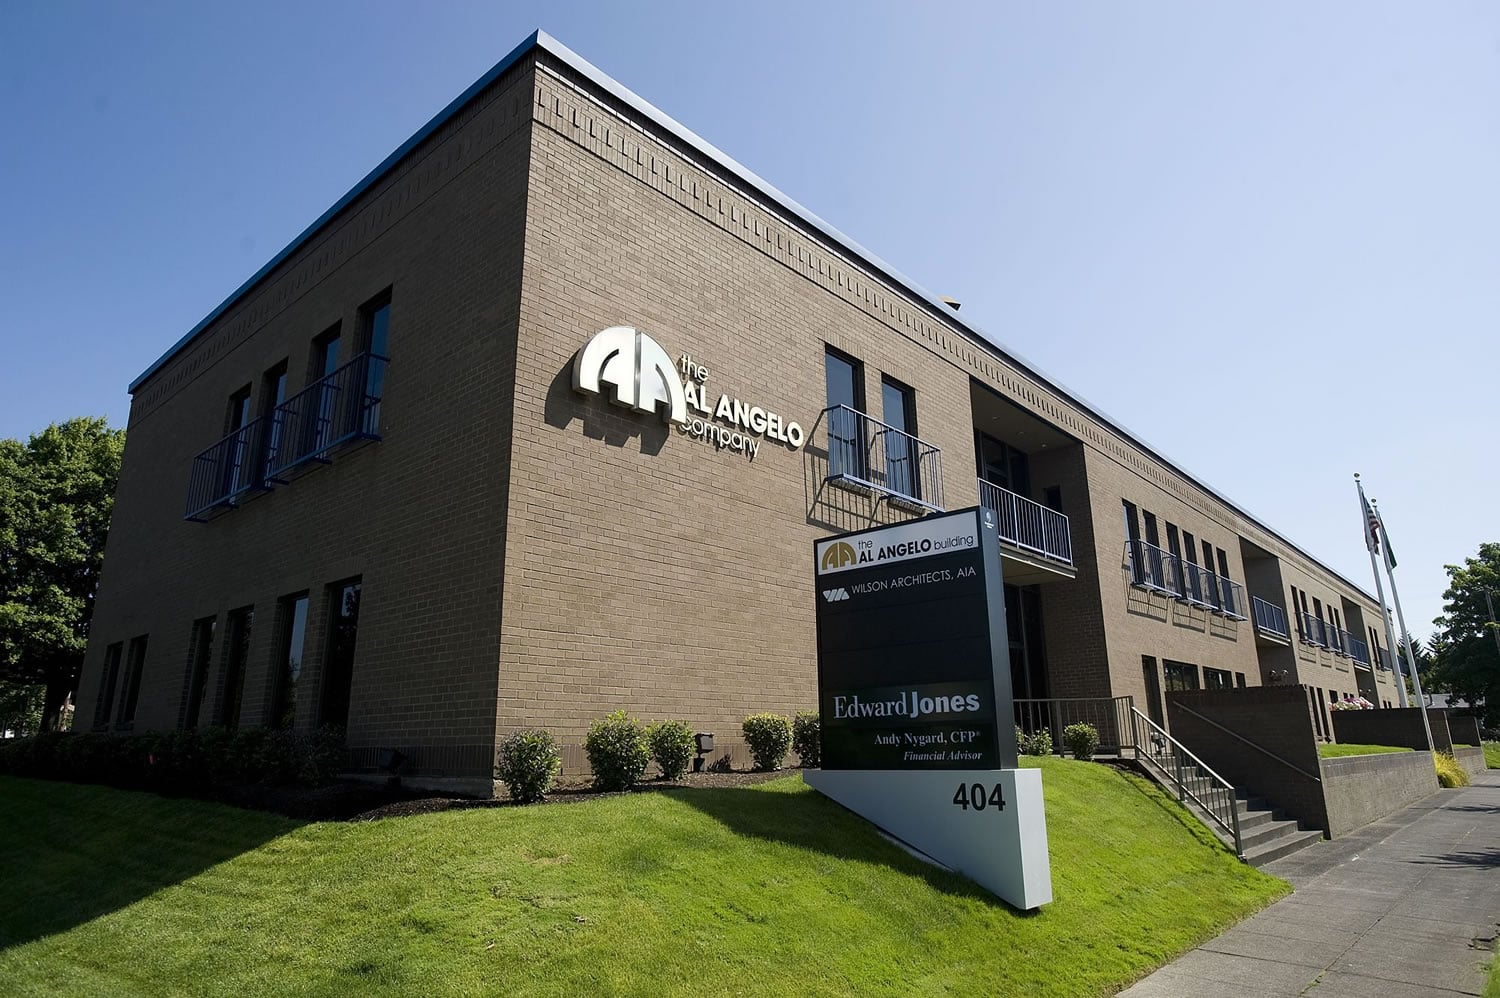 Cascade Title Co., which is now in the former headquarters of Al Angelo Co., is one of a growing number of businesses moving into downtown near Interstate 5 and West Mill Plain Boulevard.